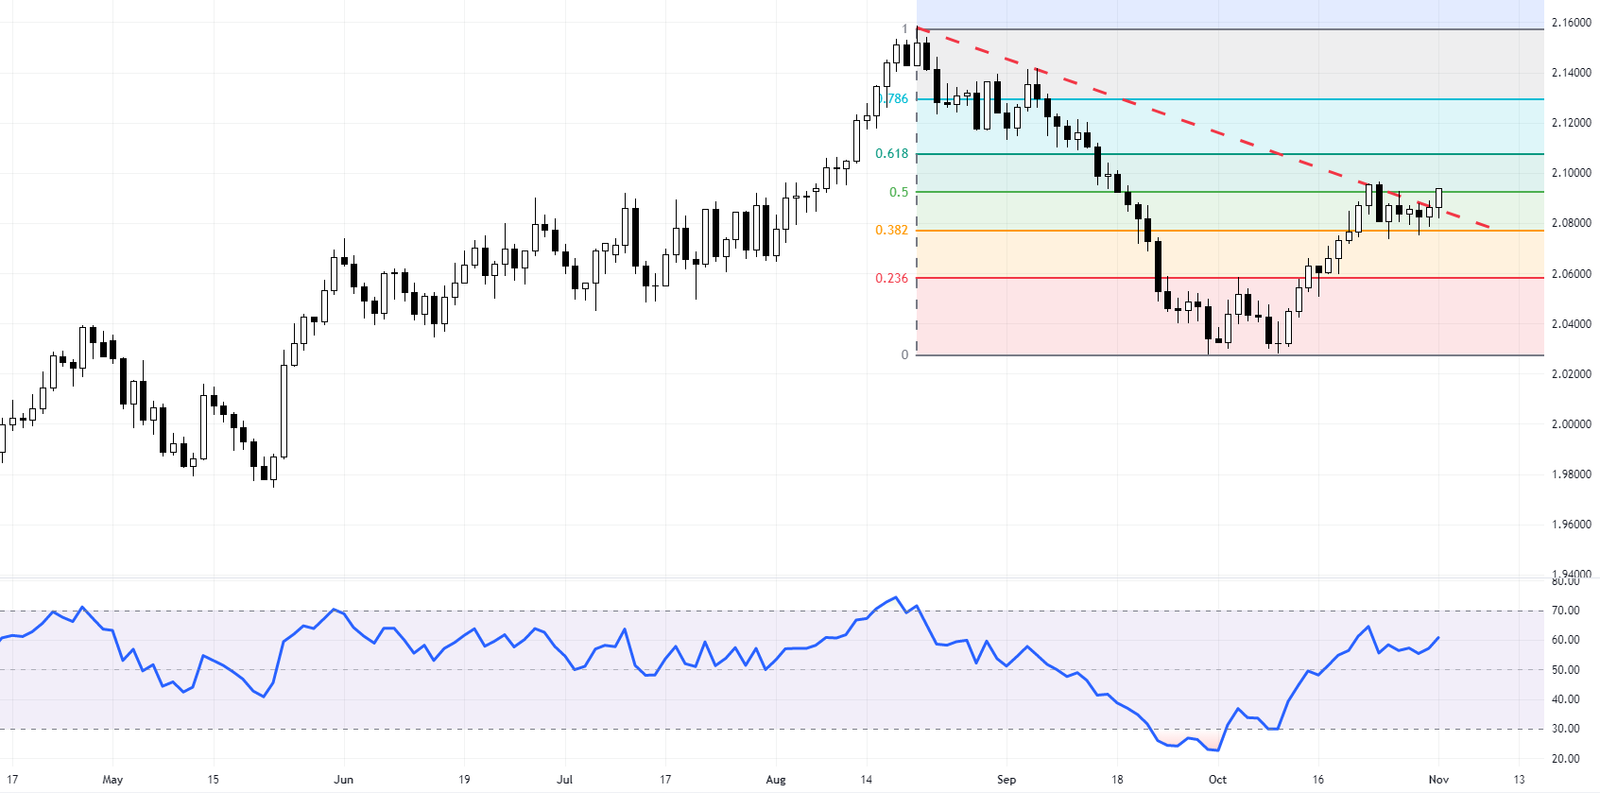 GBPNZD Forecast - A Detailed Technical Analysis